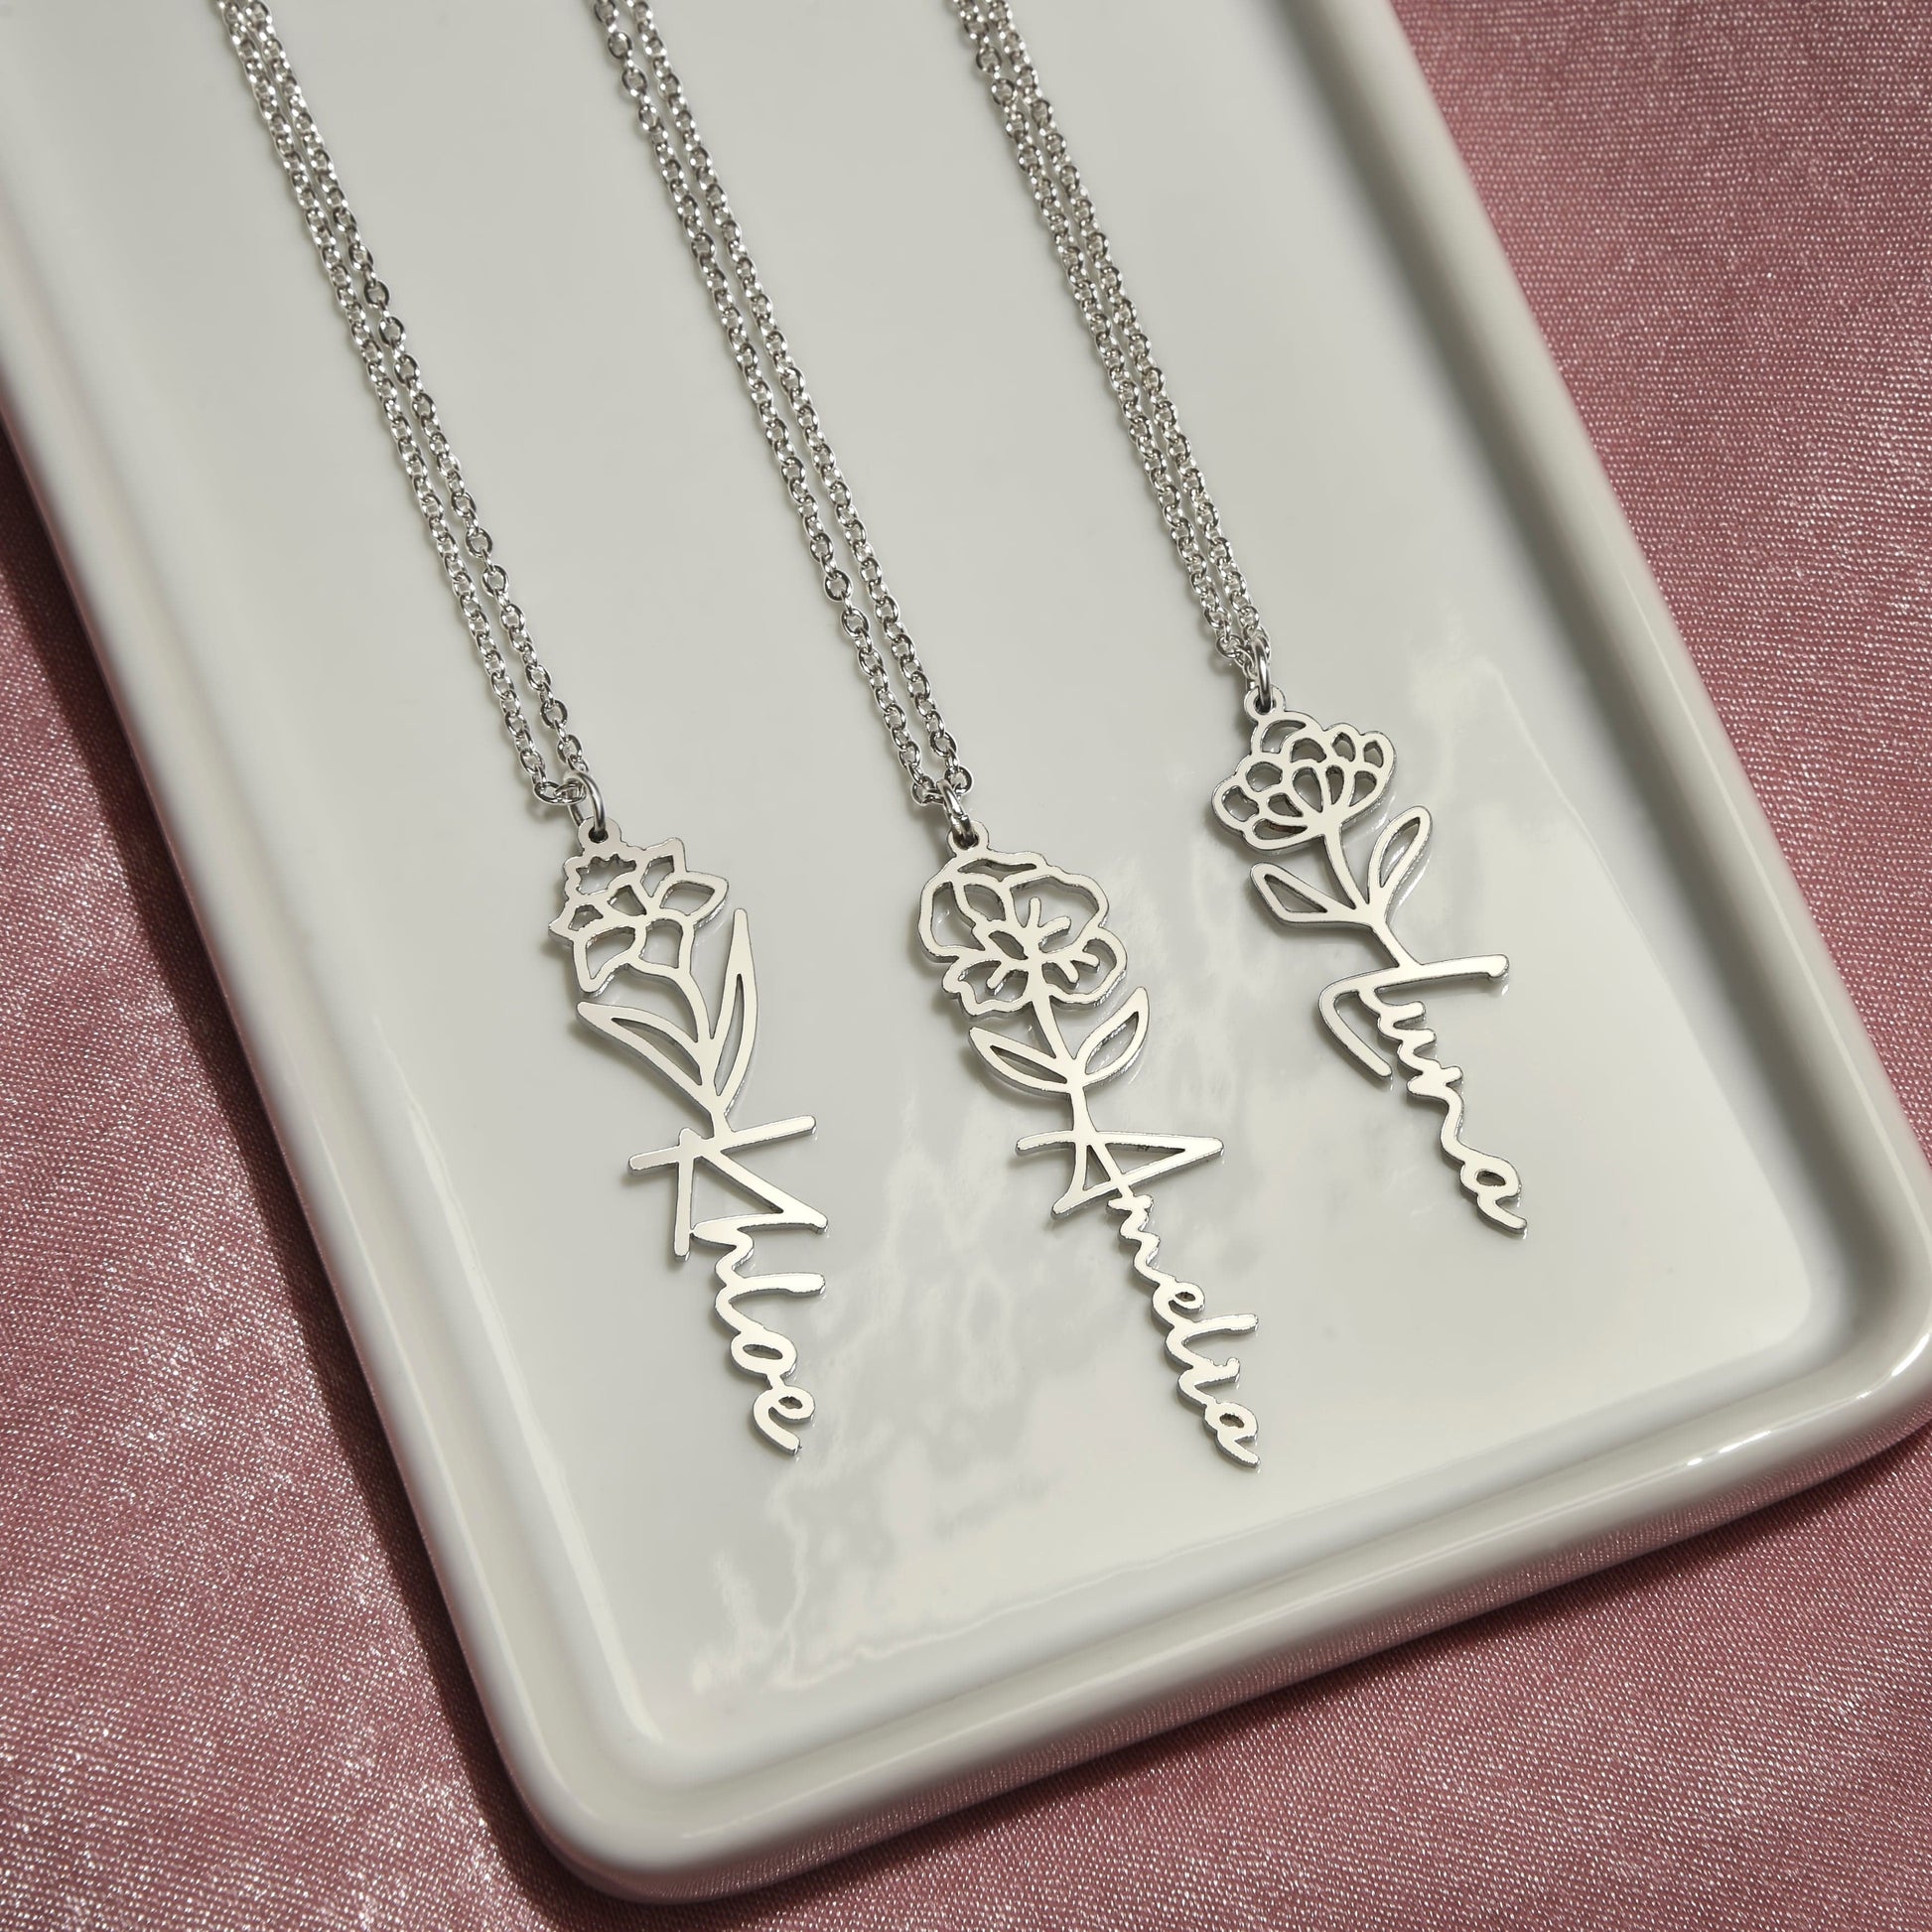 Personalized Birth Flower Name Necklace - Premium Jewelry - Shop now at San Rocco Italia